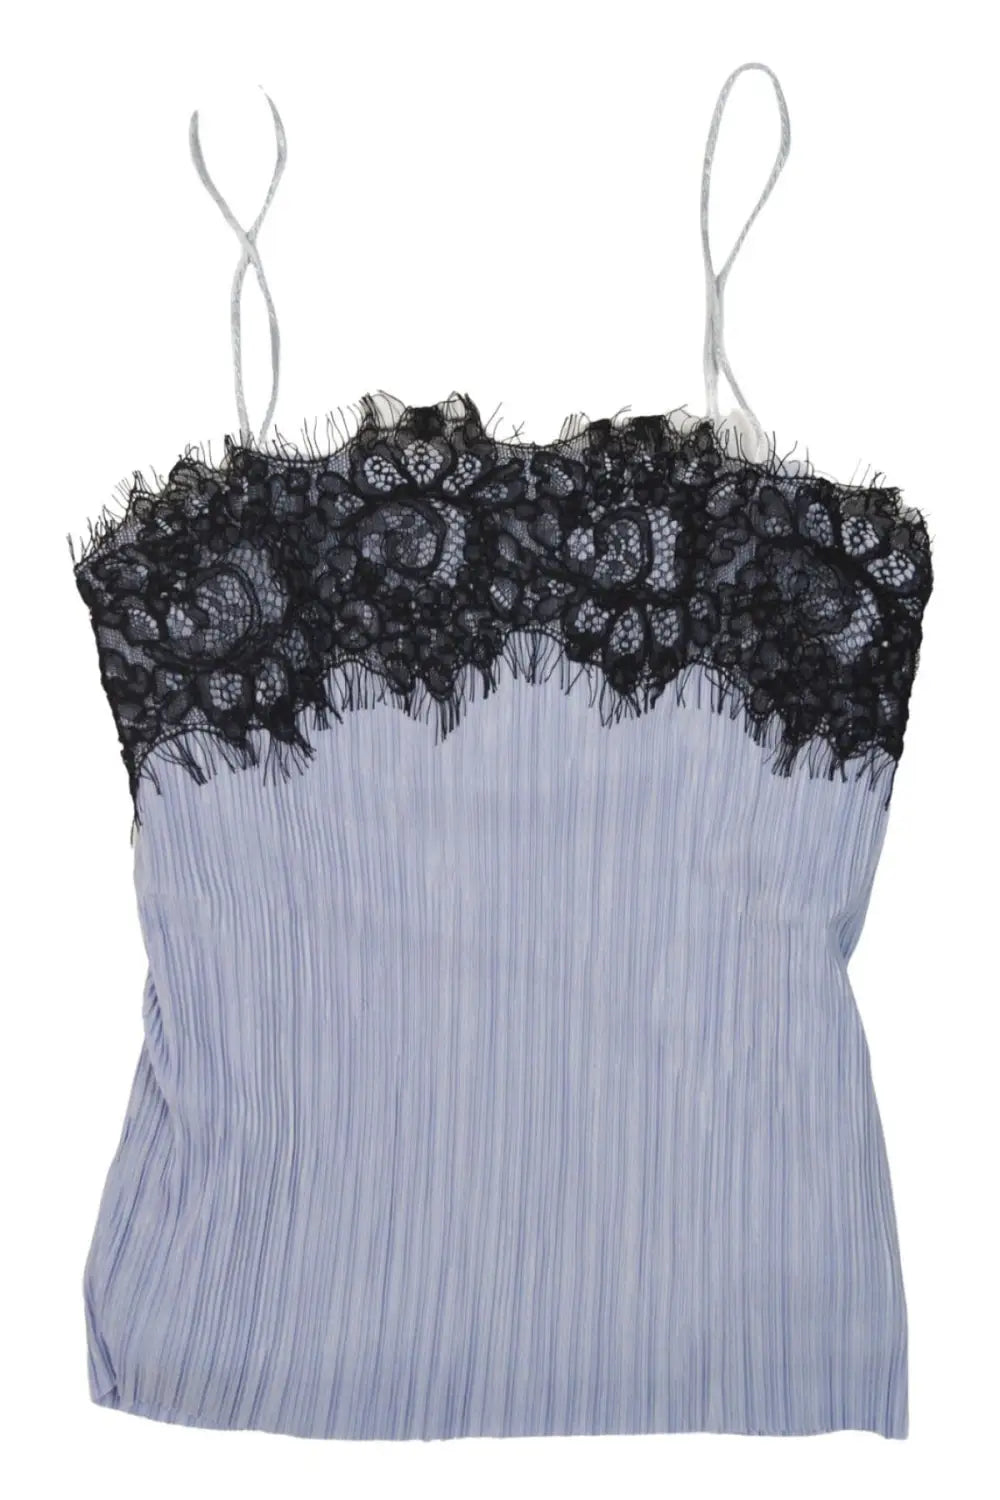 Urban Outfitters Eyelash Lace Trim Cami Top